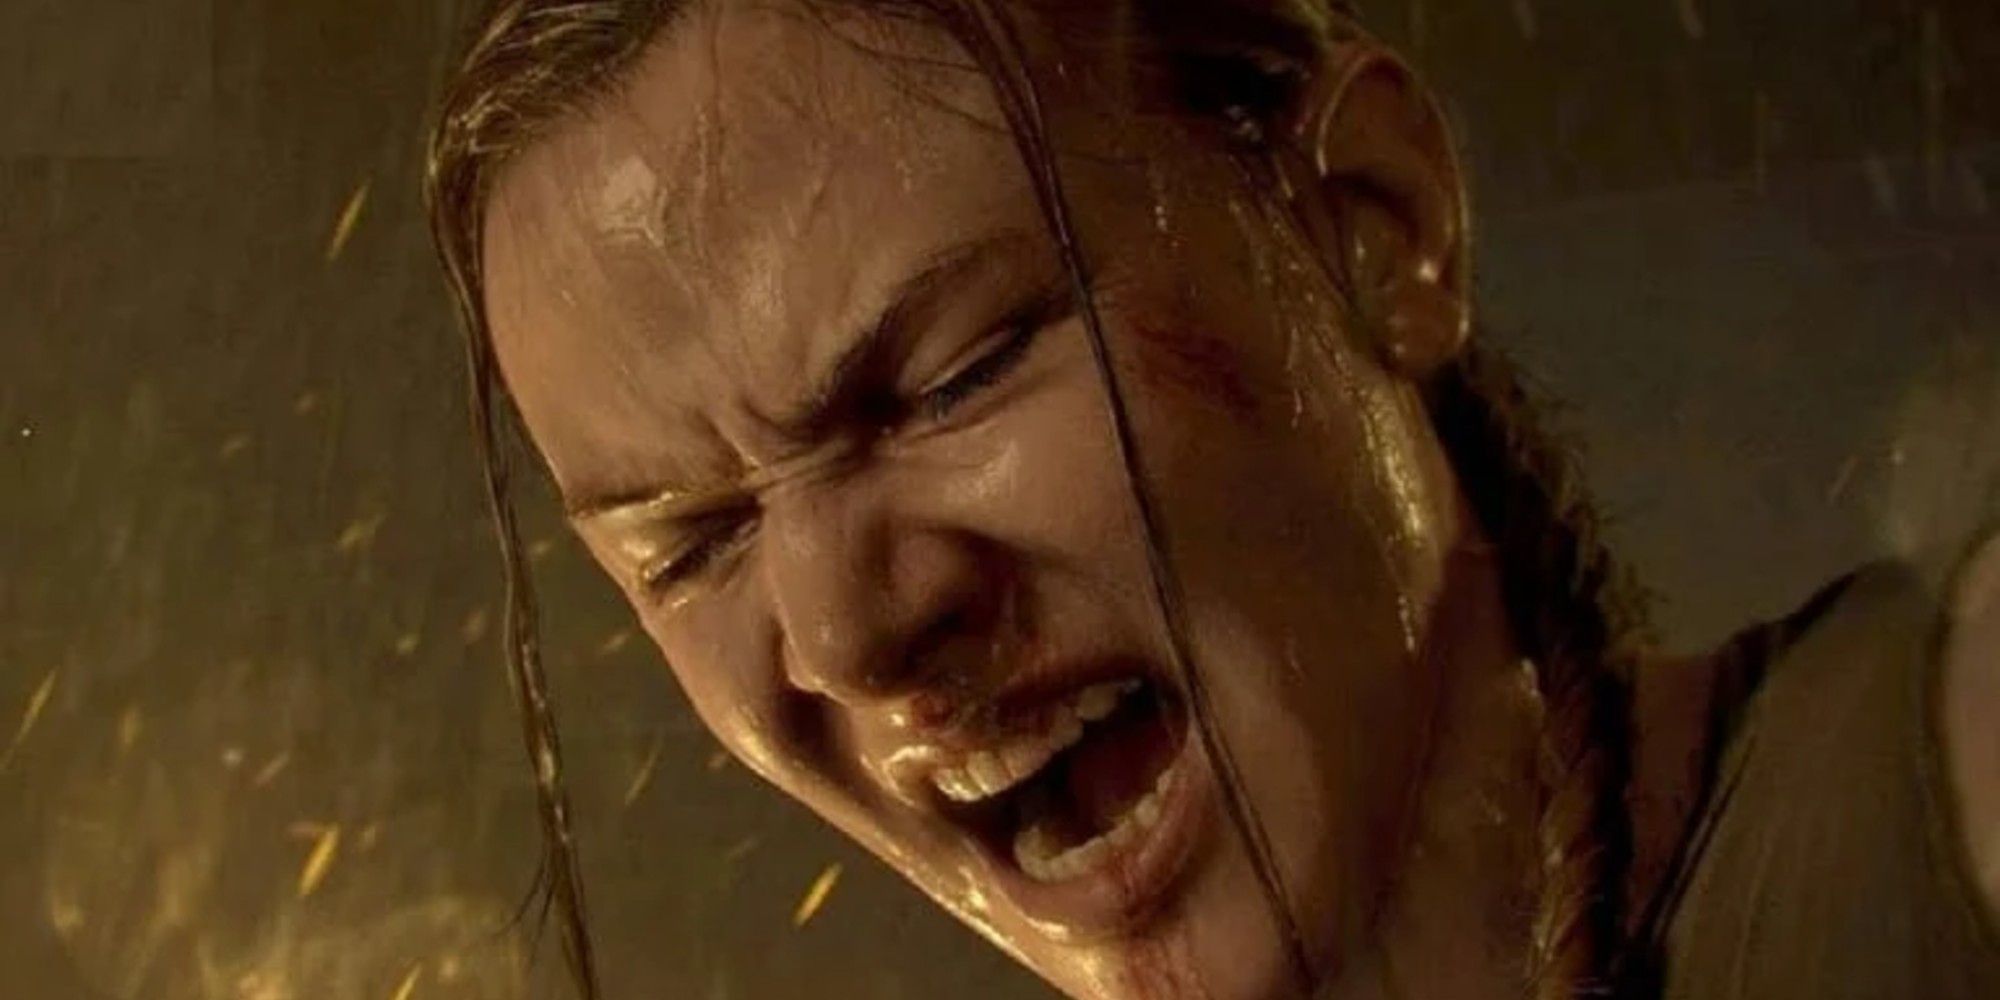 abby screaming in the rain in the last of us 2